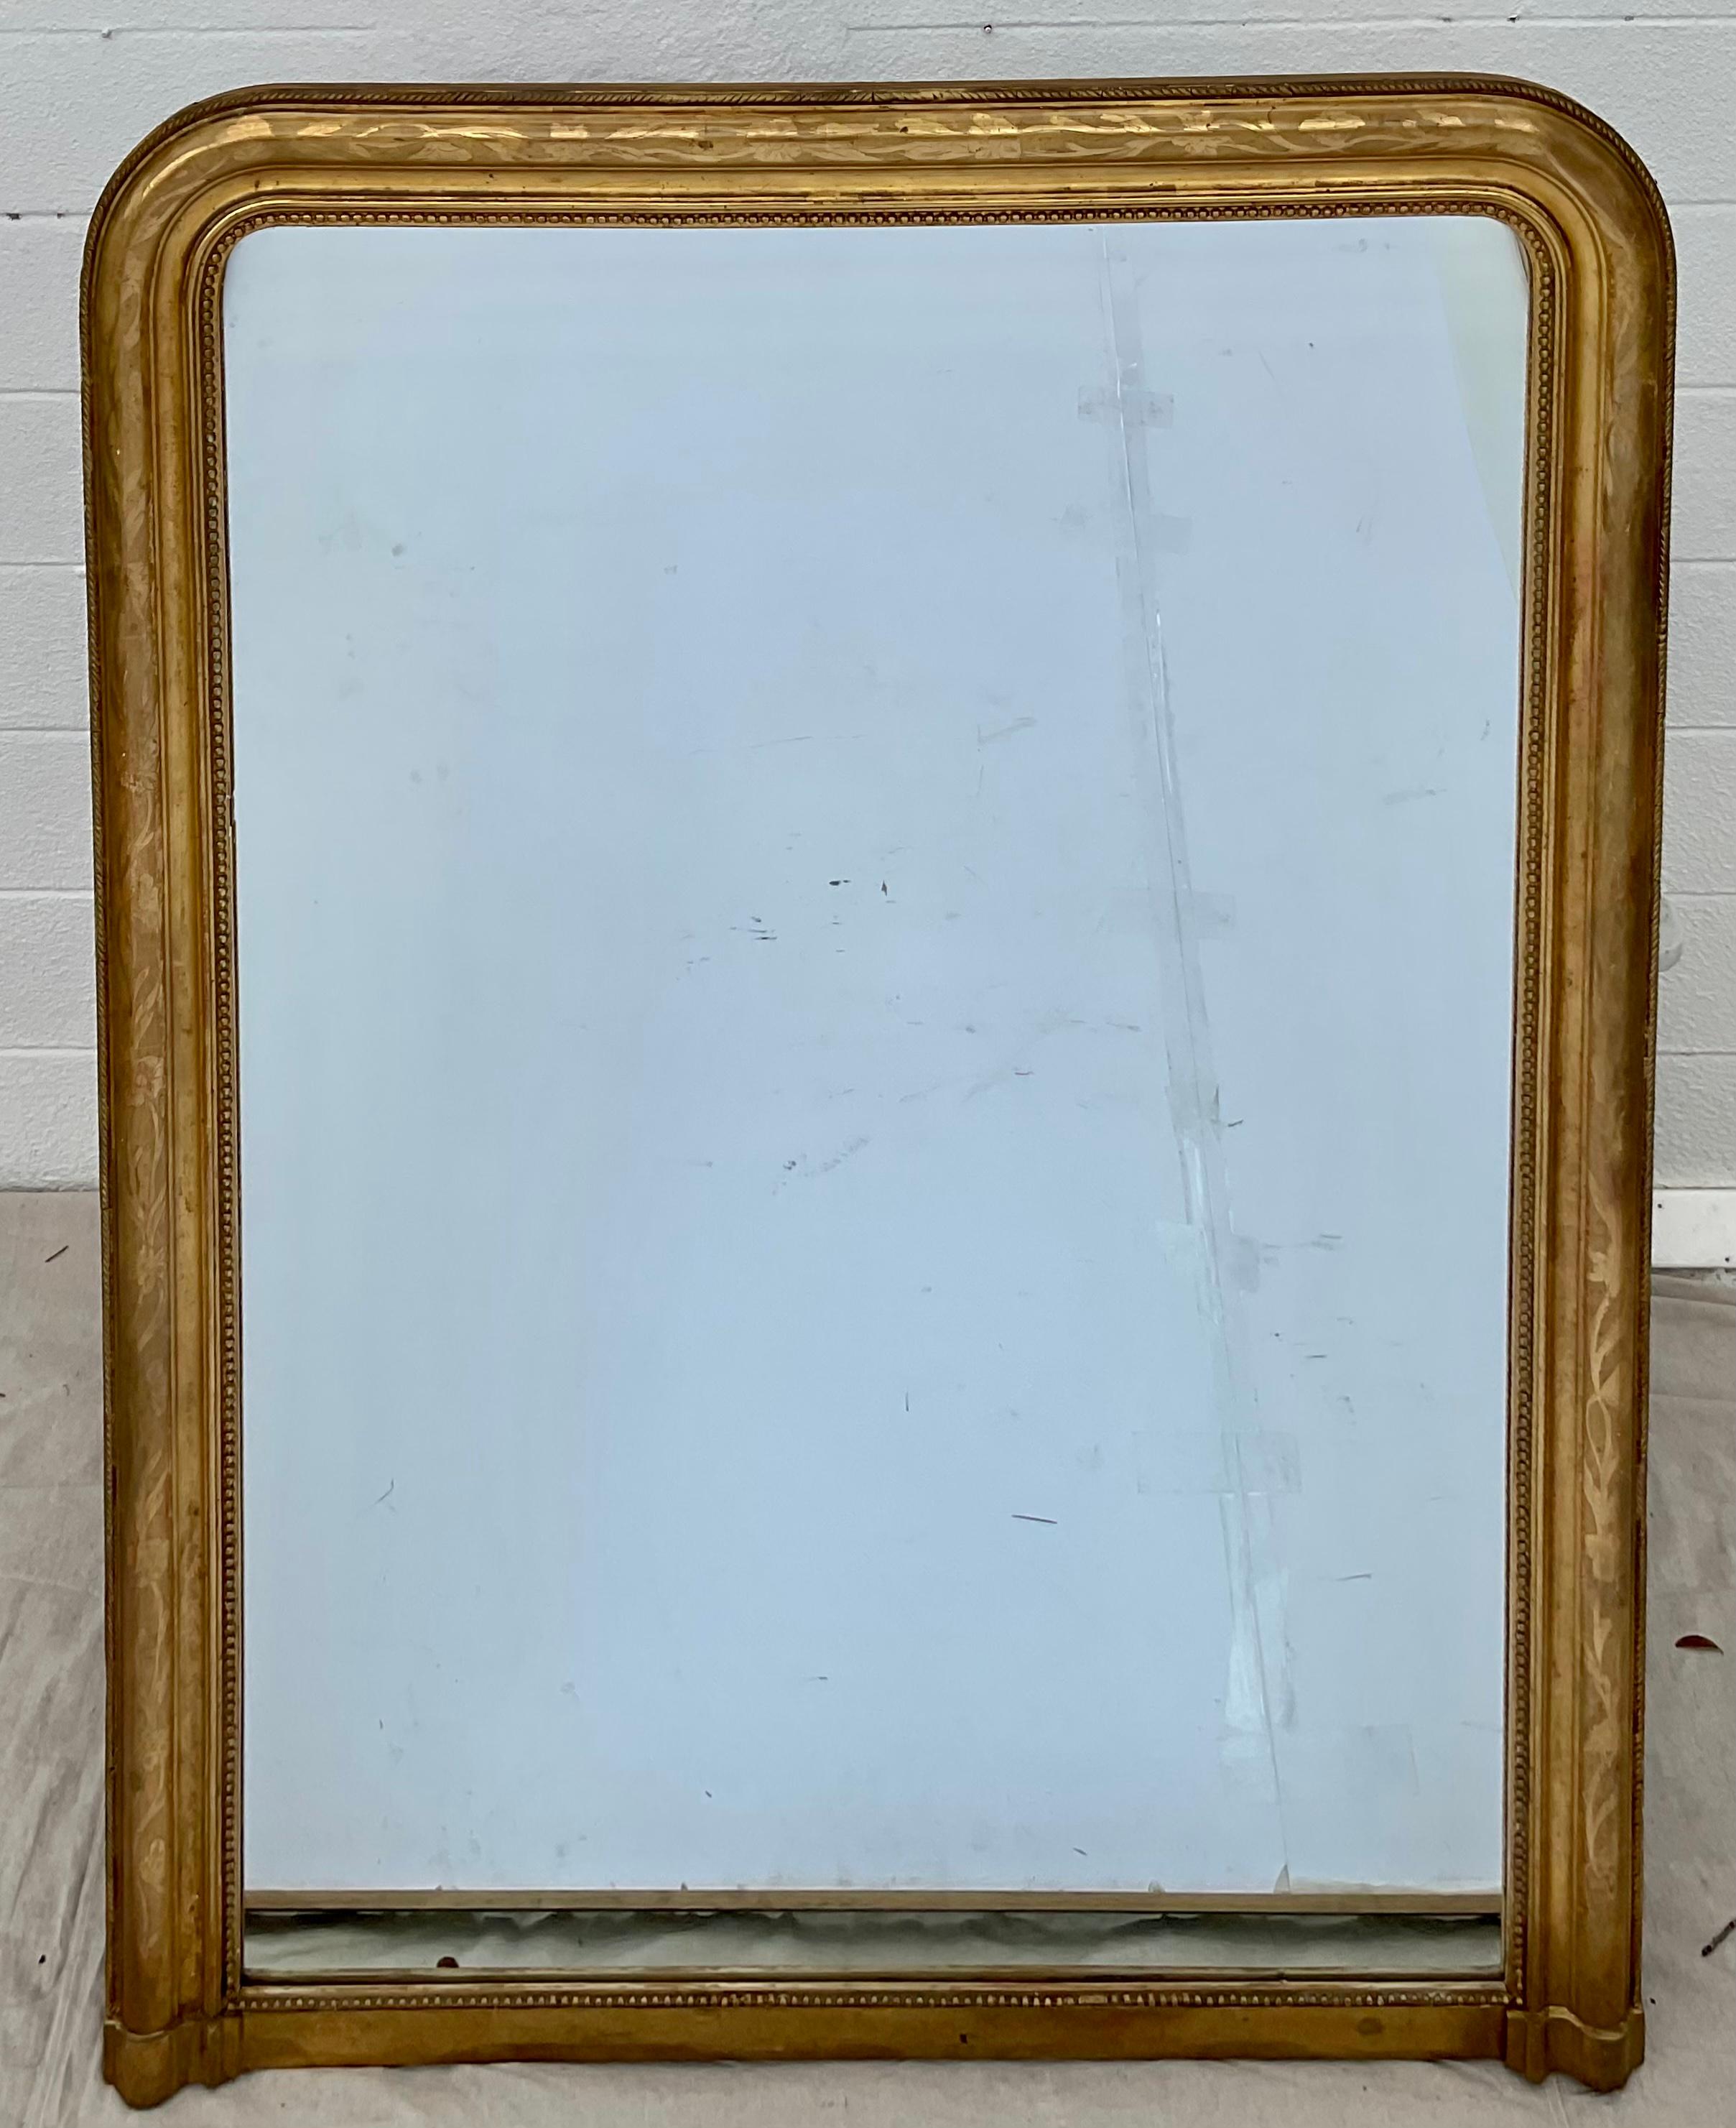 Louis Philippe mirrors are known for their rounded top corners and subtle embellishments to the frame. This fine large scale Classic example is surrounded by a lovely gilt frame.